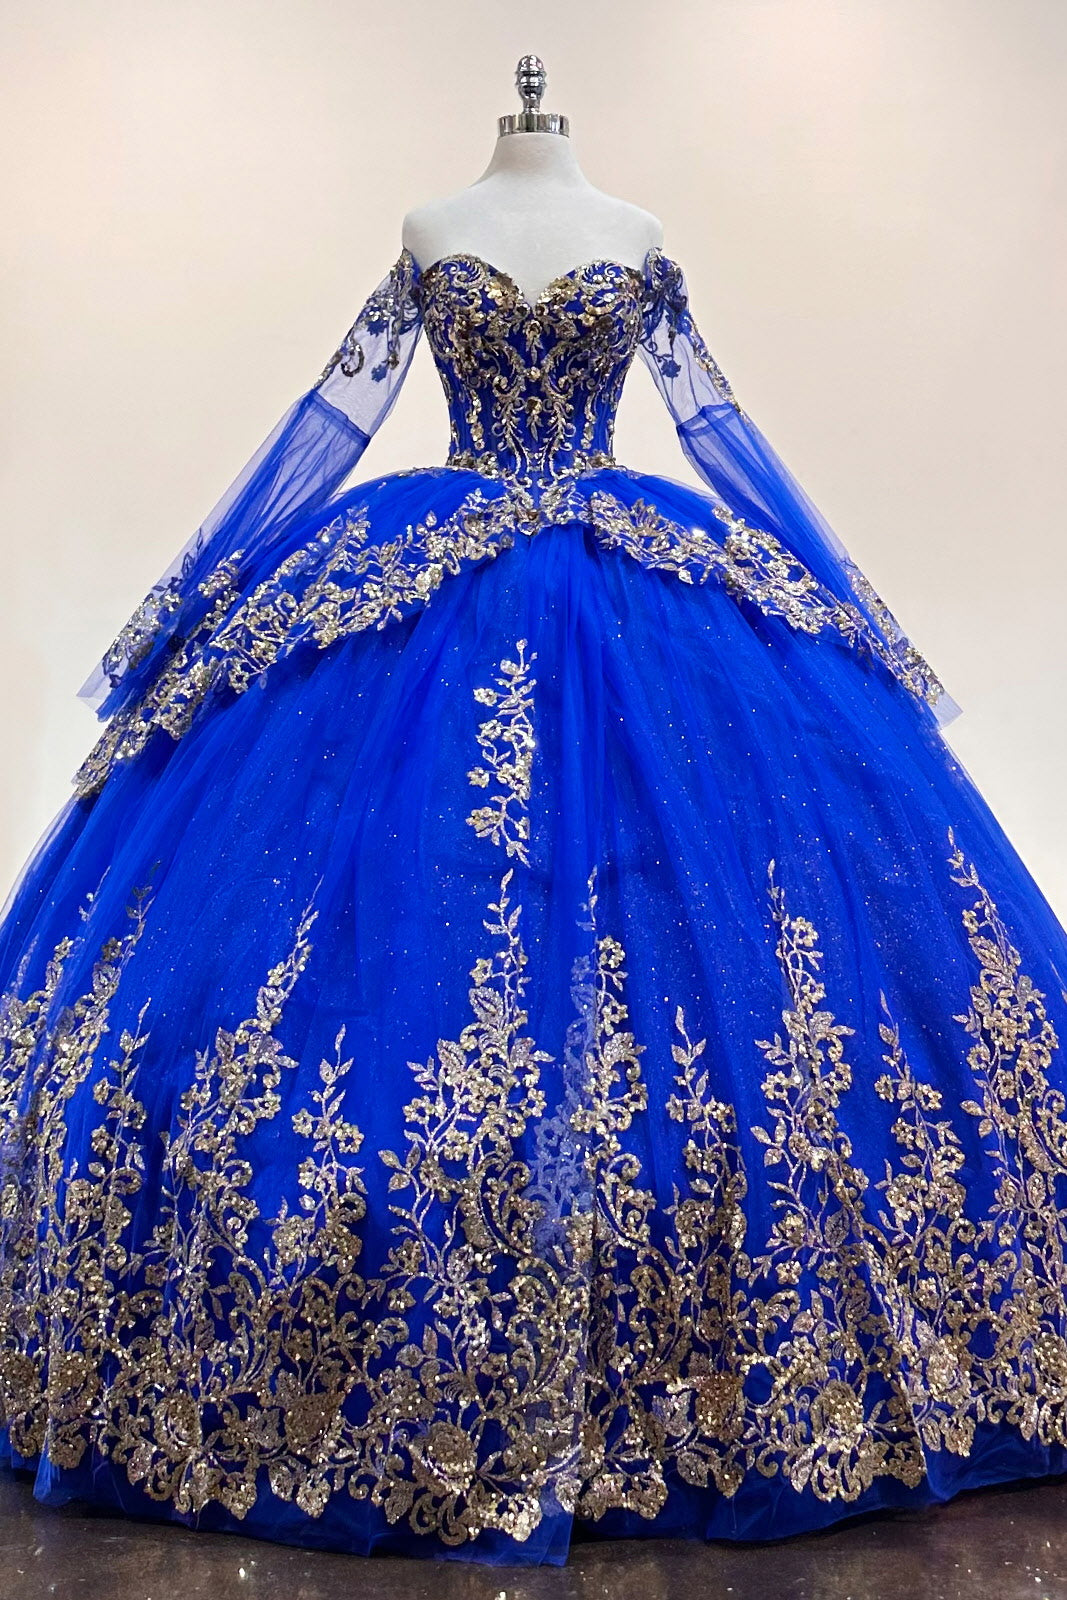 Plus Size Royal Blue and Gold Formal Ball Prom Gown | eBay